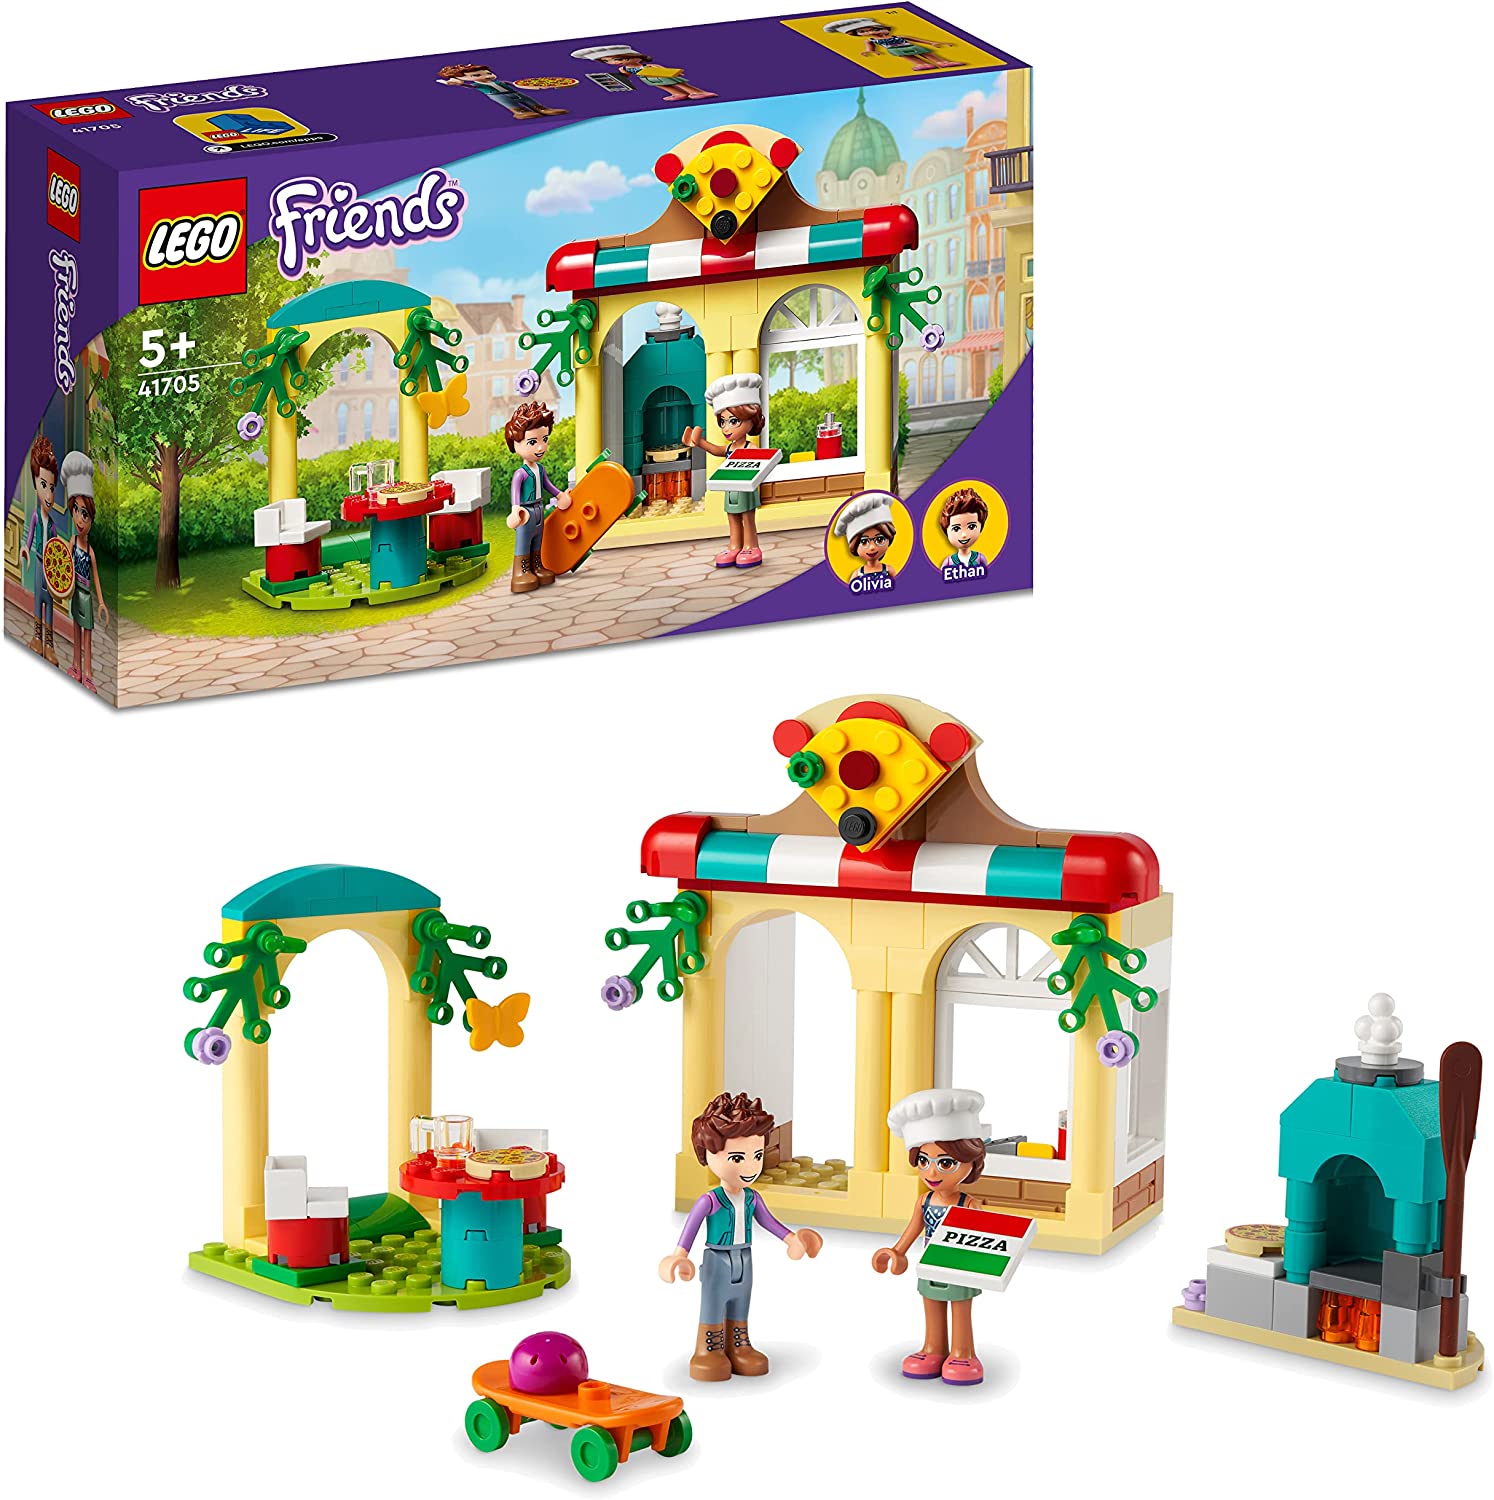 LEGO 41705 Friends Heartlake City Pizzeria Restaurant with Food as Toy with Mini Dolls Olivia and Ethan, for Children from 5 Years